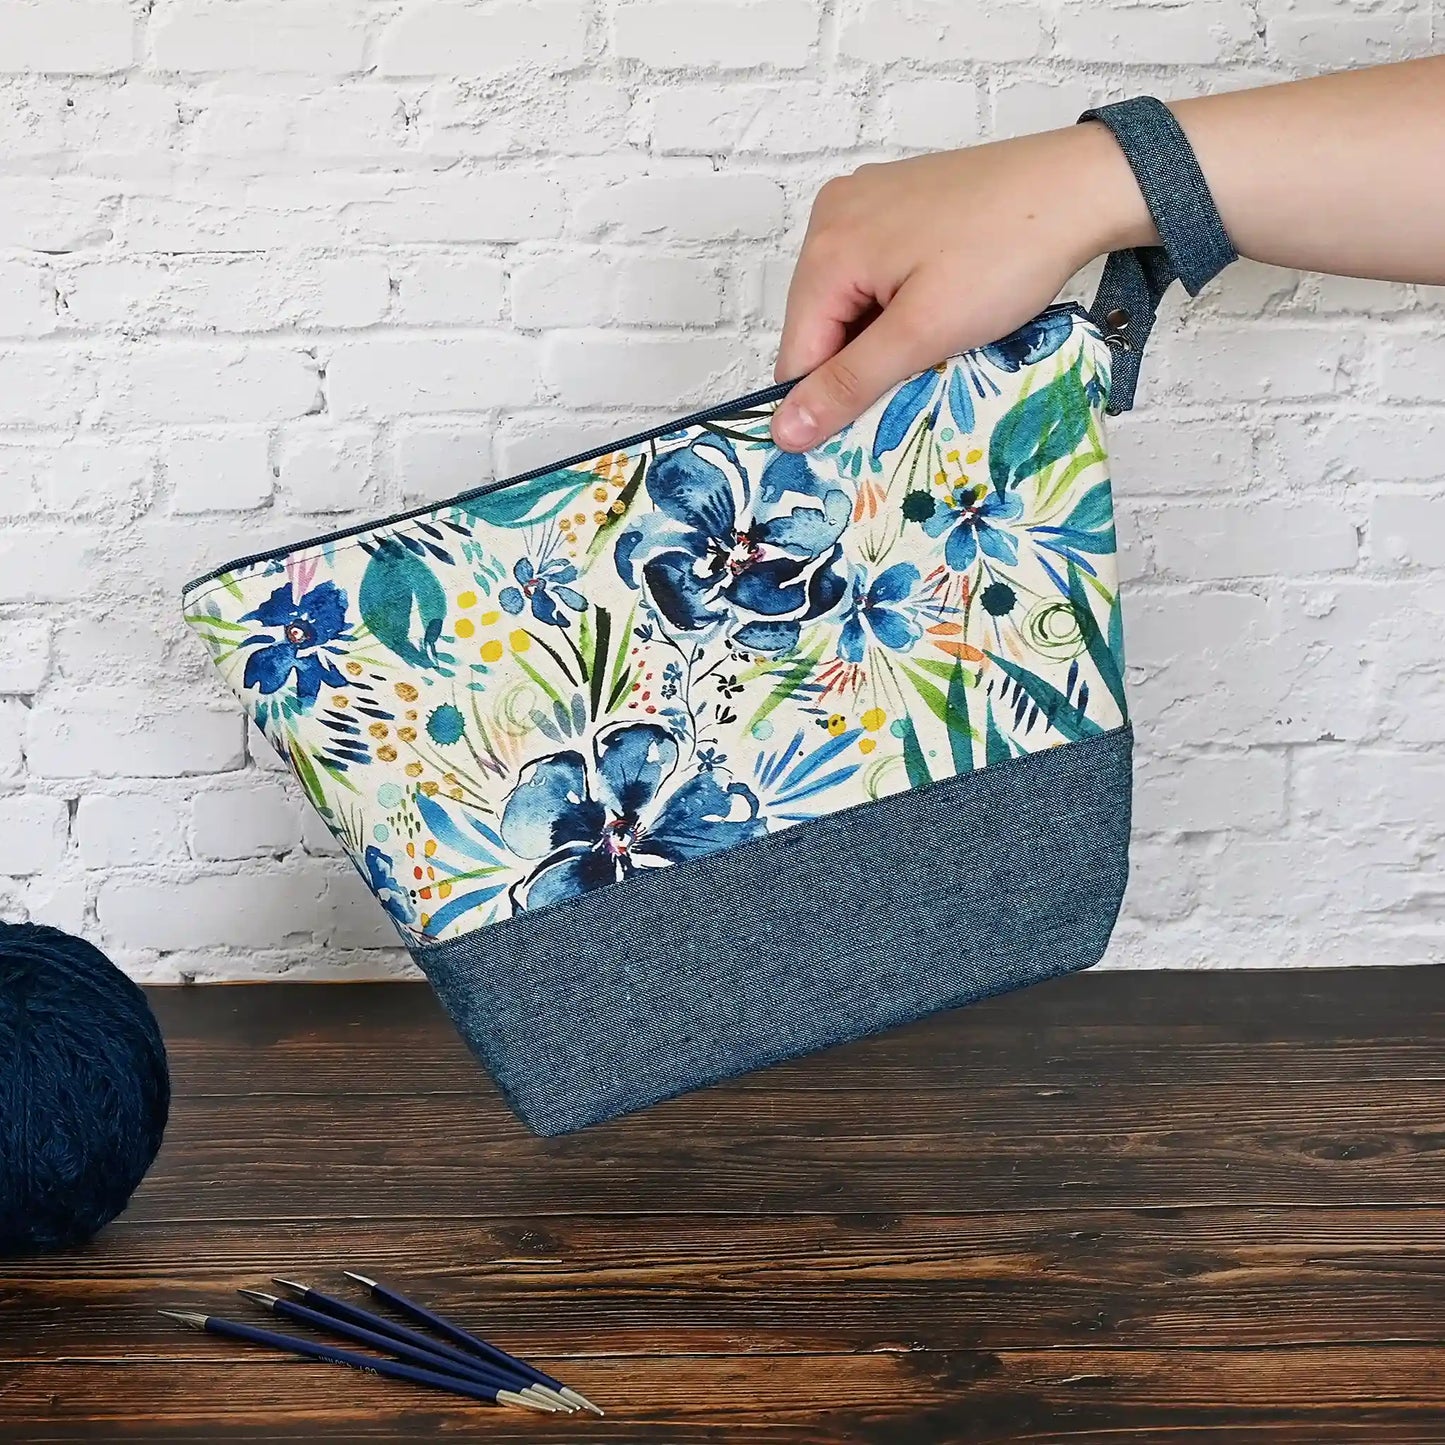 Zippered linen project bag in inky watercolour florals and paired with a peacock blue linen.  Made in Canada by Yellow Petal Handmade.